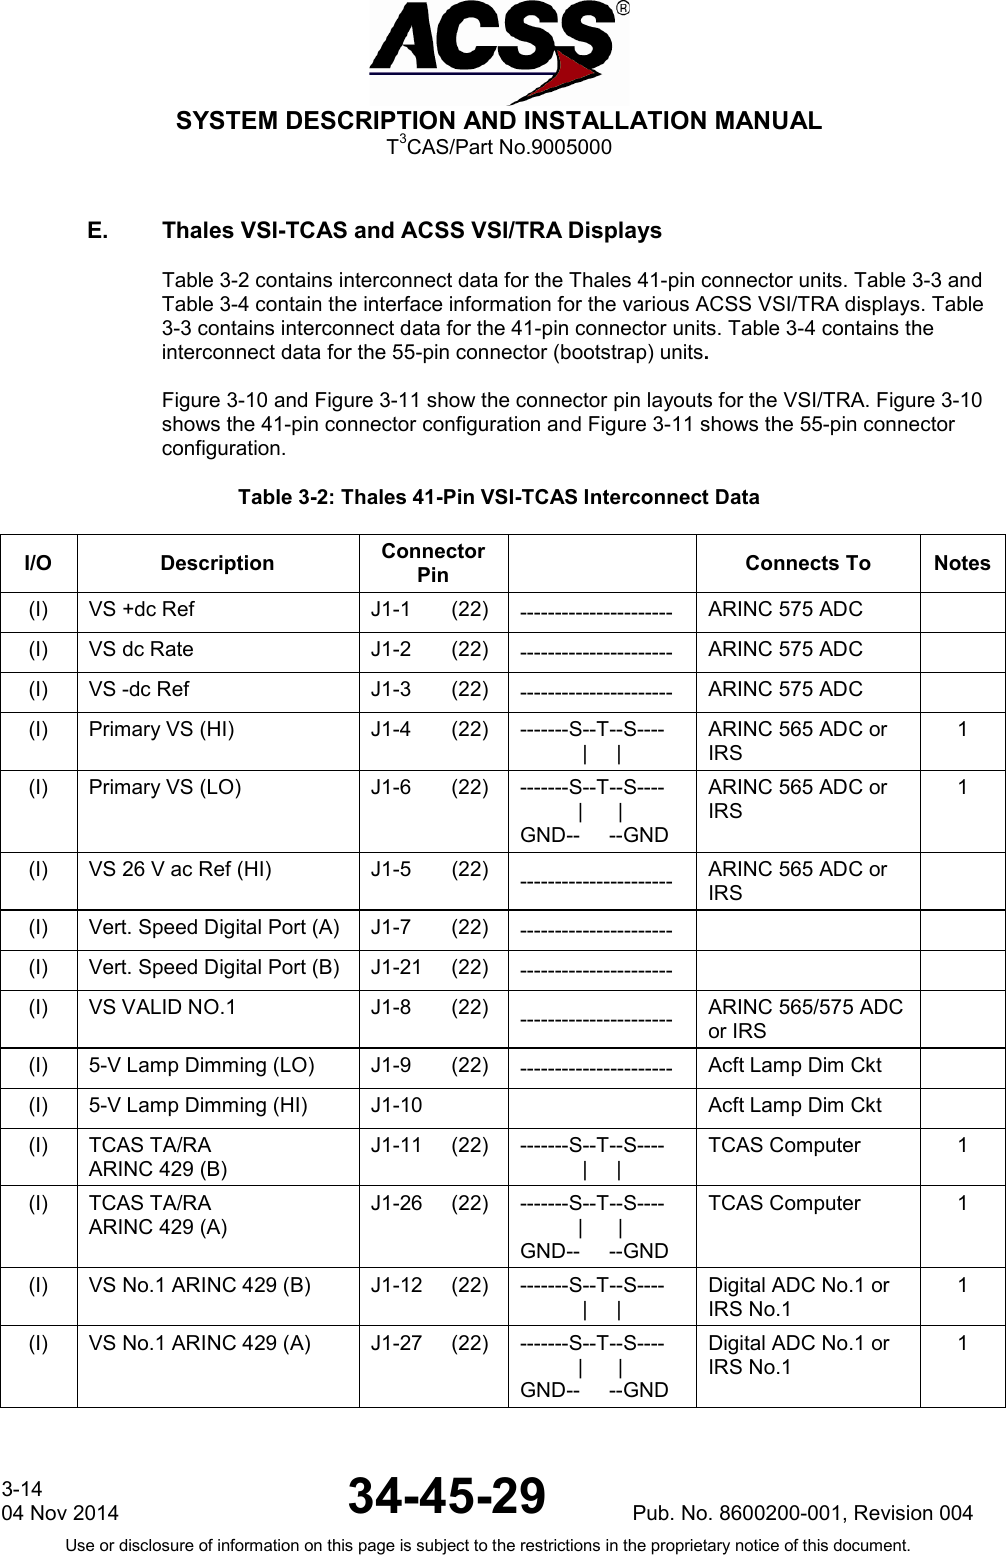  SYSTEM DESCRIPTION AND INSTALLATION MANUAL T3CAS/Part No.9005000 E. Thales VSI-TCAS and ACSS VSI/TRA Displays Table 3-2 contains interconnect data for the Thales 41-pin connector units. Table 3-3 and Table 3-4 contain the interface information for the various ACSS VSI/TRA displays. Table 3-3 contains interconnect data for the 41-pin connector units. Table 3-4 contains the interconnect data for the 55-pin connector (bootstrap) units.  Figure 3-10 and Figure 3-11 show the connector pin layouts for the VSI/TRA. Figure 3-10 shows the 41-pin connector configuration and Figure 3-11 shows the 55-pin connector configuration. Table 3-2: Thales 41-Pin VSI-TCAS Interconnect Data I/O Description Connector Pin  Connects To Notes (I) VS +dc Ref J1-1       (22) ---------------------- ARINC 575 ADC   (I) VS dc Rate J1-2       (22) ---------------------- ARINC 575 ADC   (I) VS -dc Ref J1-3       (22) ---------------------- ARINC 575 ADC   (I) Primary VS (HI) J1-4       (22) -------S--T--S---- |     | ARINC 565 ADC or IRS 1 (I) Primary VS (LO) J1-6       (22) -------S--T--S----           |      | GND--     --GND ARINC 565 ADC or IRS 1 (I) VS 26 V ac Ref (HI) J1-5       (22) ---------------------- ARINC 565 ADC or IRS  (I) Vert. Speed Digital Port (A) J1-7       (22) ----------------------   (I) Vert. Speed Digital Port (B) J1-21     (22) ----------------------   (I) VS VALID NO.1 J1-8       (22) ---------------------- ARINC 565/575 ADC or IRS  (I) 5-V Lamp Dimming (LO) J1-9       (22) ---------------------- Acft Lamp Dim Ckt  (I) 5-V Lamp Dimming (HI) J1-10  Acft Lamp Dim Ckt  (I) TCAS TA/RA ARINC 429 (B) J1-11     (22) -------S--T--S---- |     | TCAS Computer 1 (I) TCAS TA/RA ARINC 429 (A) J1-26     (22) -------S--T--S----           |      | GND--     --GND TCAS Computer 1 (I) VS No.1 ARINC 429 (B) J1-12     (22) -------S--T--S---- |     | Digital ADC No.1 or IRS No.1 1 (I) VS No.1 ARINC 429 (A) J1-27     (22) -------S--T--S----           |      | GND--     --GND Digital ADC No.1 or IRS No.1 1  3-14 04 Nov 2014 34-45-29 Pub. No. 8600200-001, Revision 004 Use or disclosure of information on this page is subject to the restrictions in the proprietary notice of this document.    